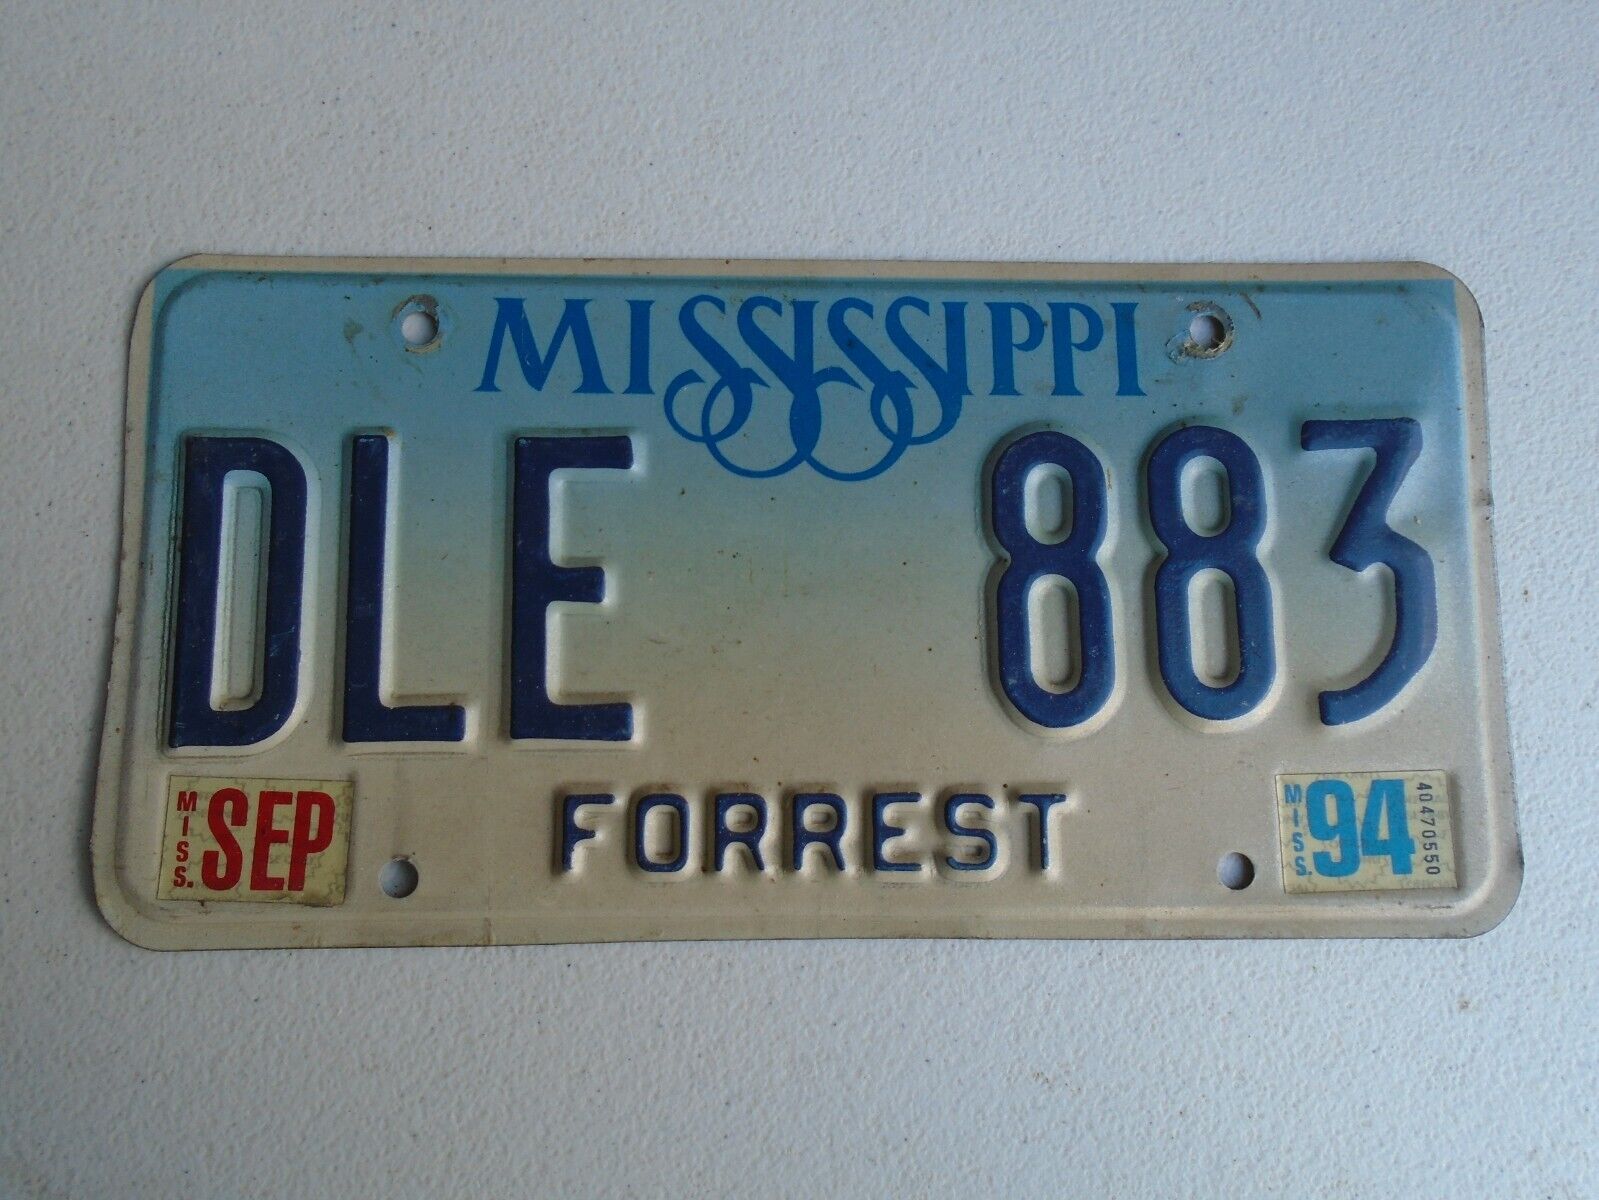 Mississippi License Plate Car Tag Expired Sep 1994 Forrest County MS DLE 883